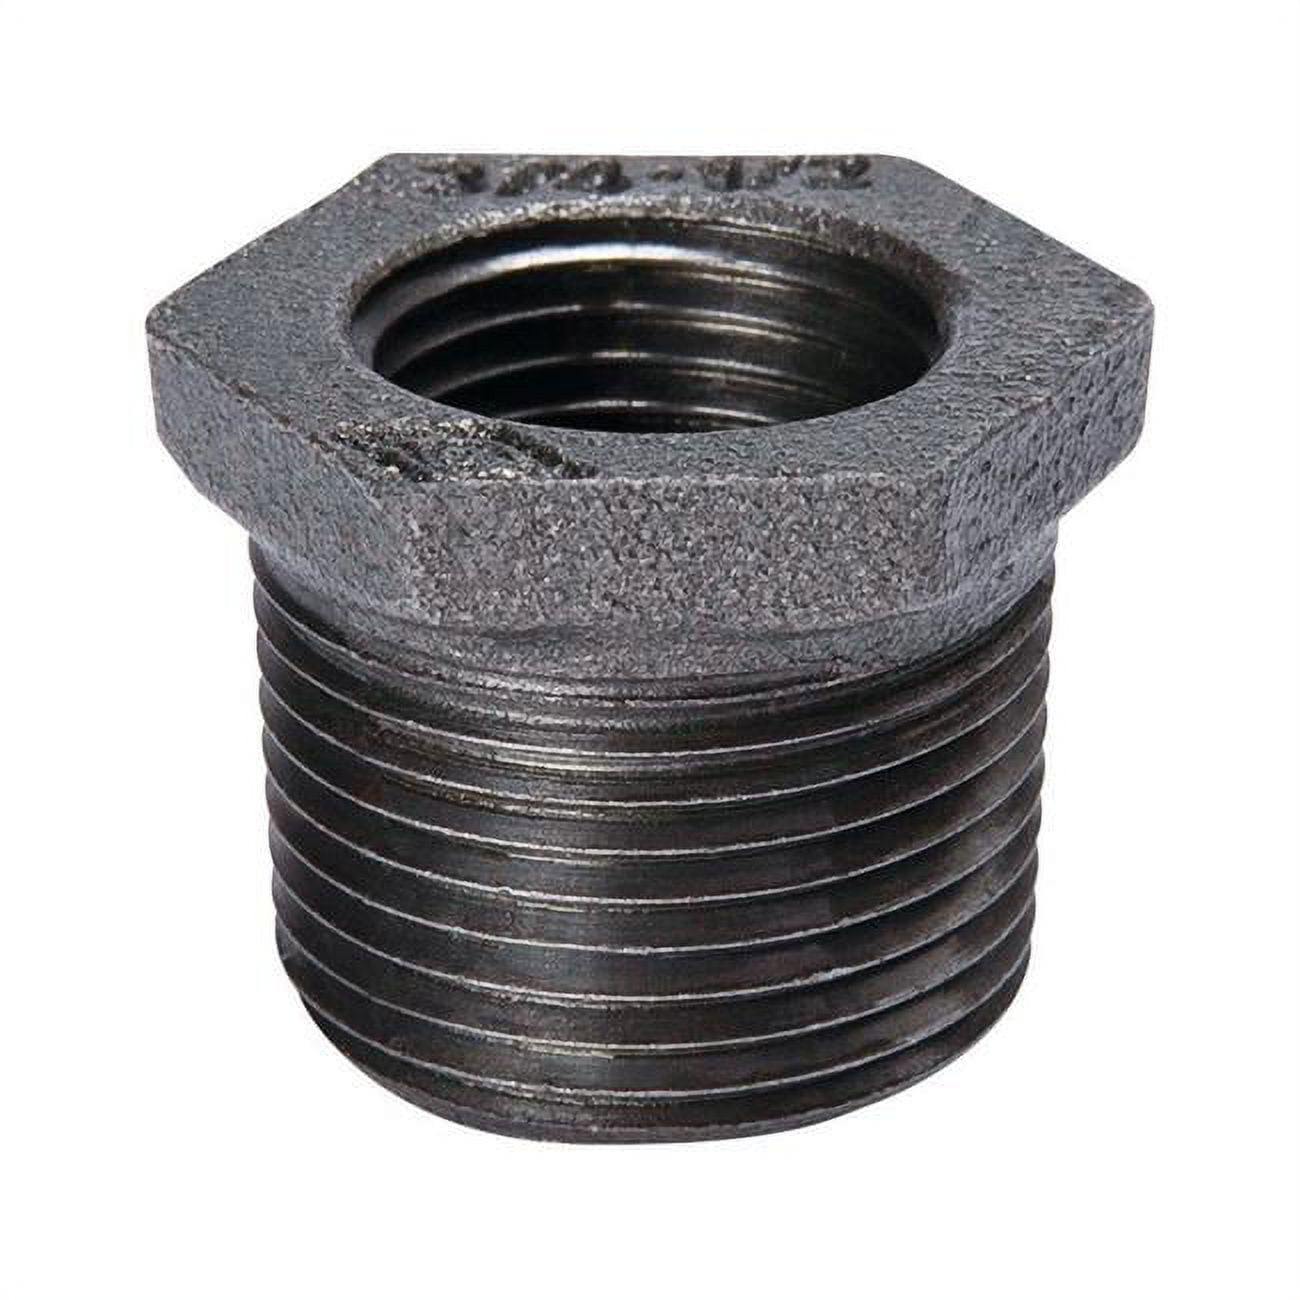 4908513 Southland 3 In. Fpt X 1.5 In. Dia. Fpt Black Malleable Iron Hex Bushing